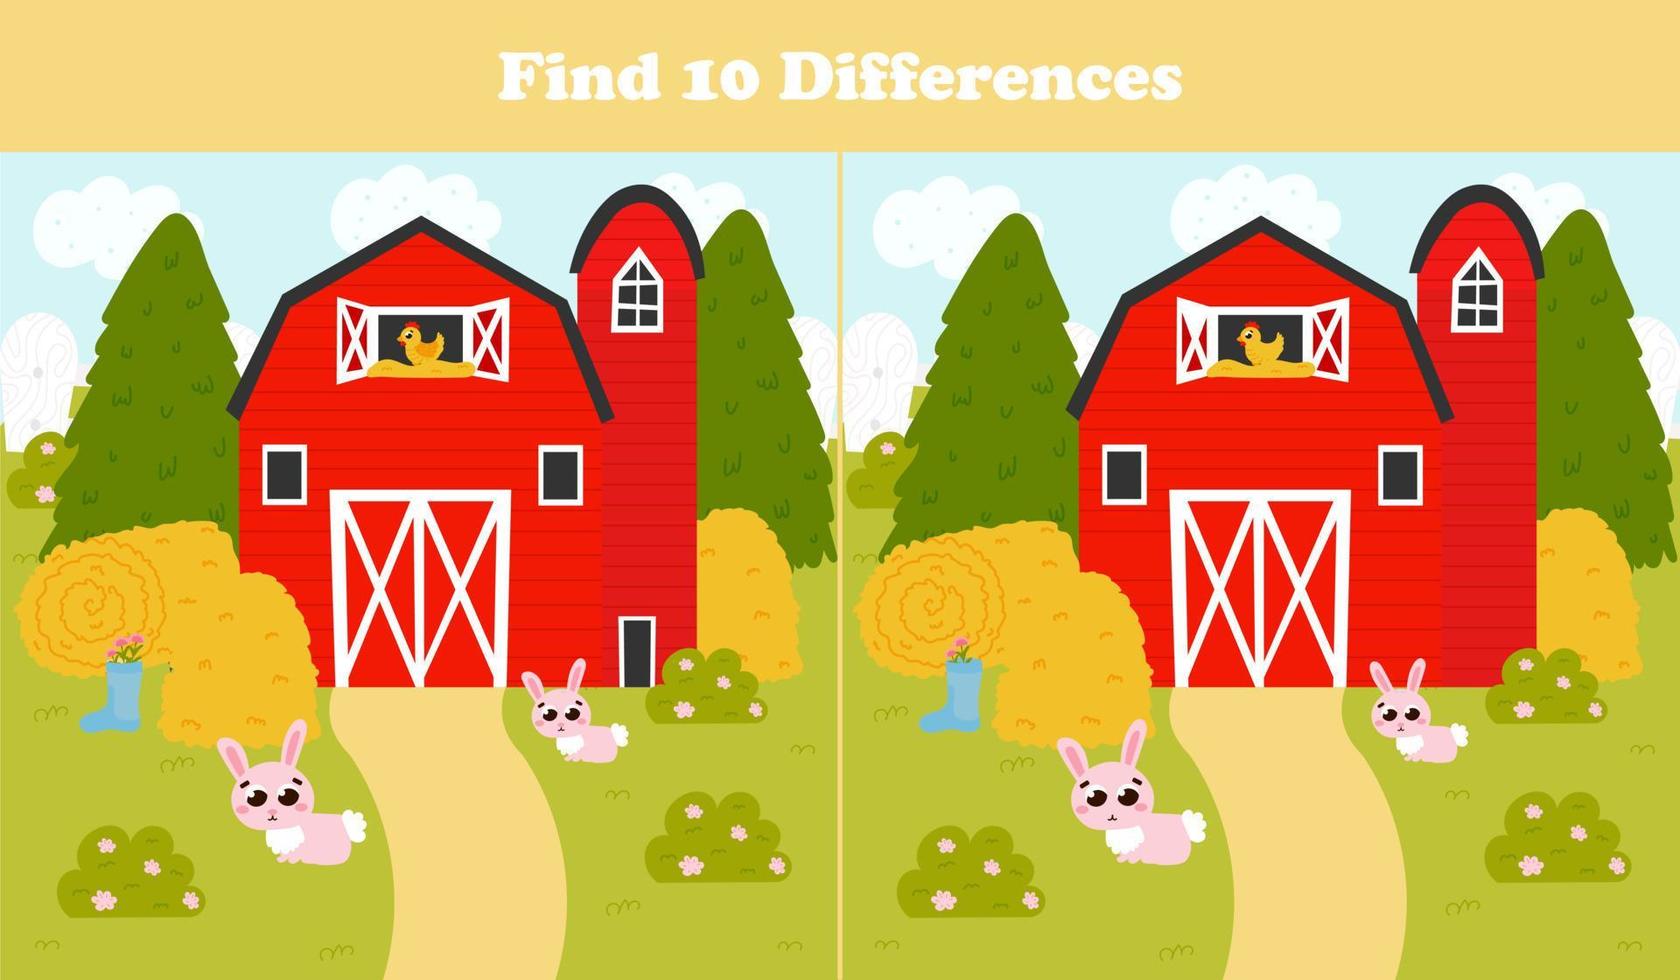 Find differences game for kids with barn and haystacks, rabbits, farm landscape in cartoon style, printable vector